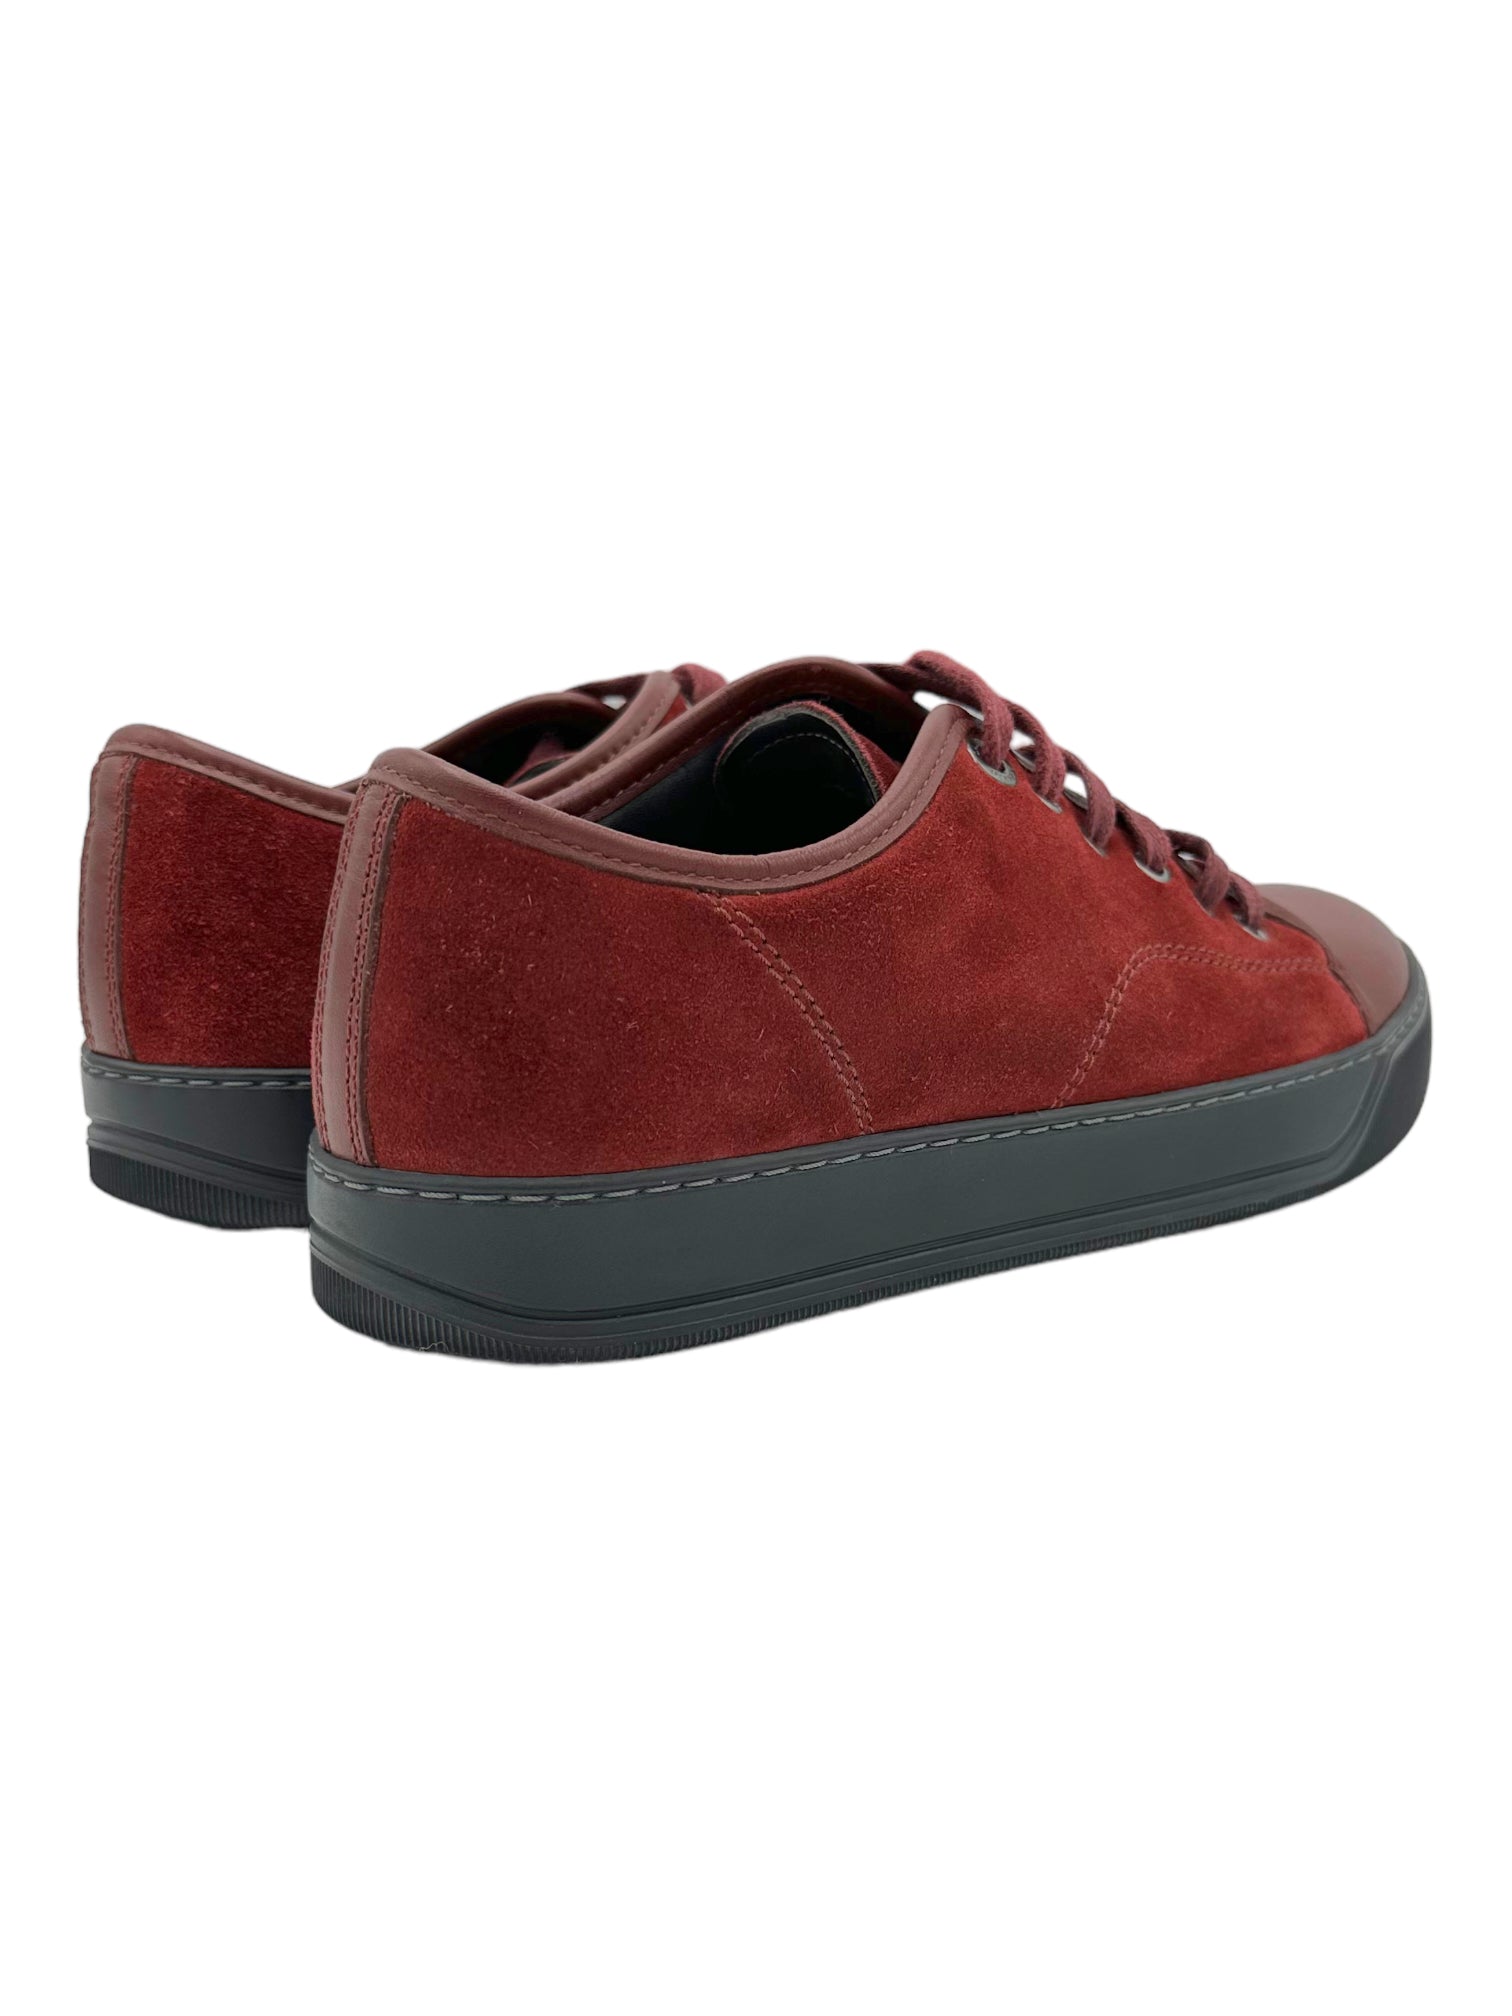 Lanvin Paris Maroon Suede & Black Sole DBB1 Casual Sneakers - Genuine Design Luxury Consignment. New & Pre-Owned Clothing, Shoes, & Accessories. Calgary, Canada